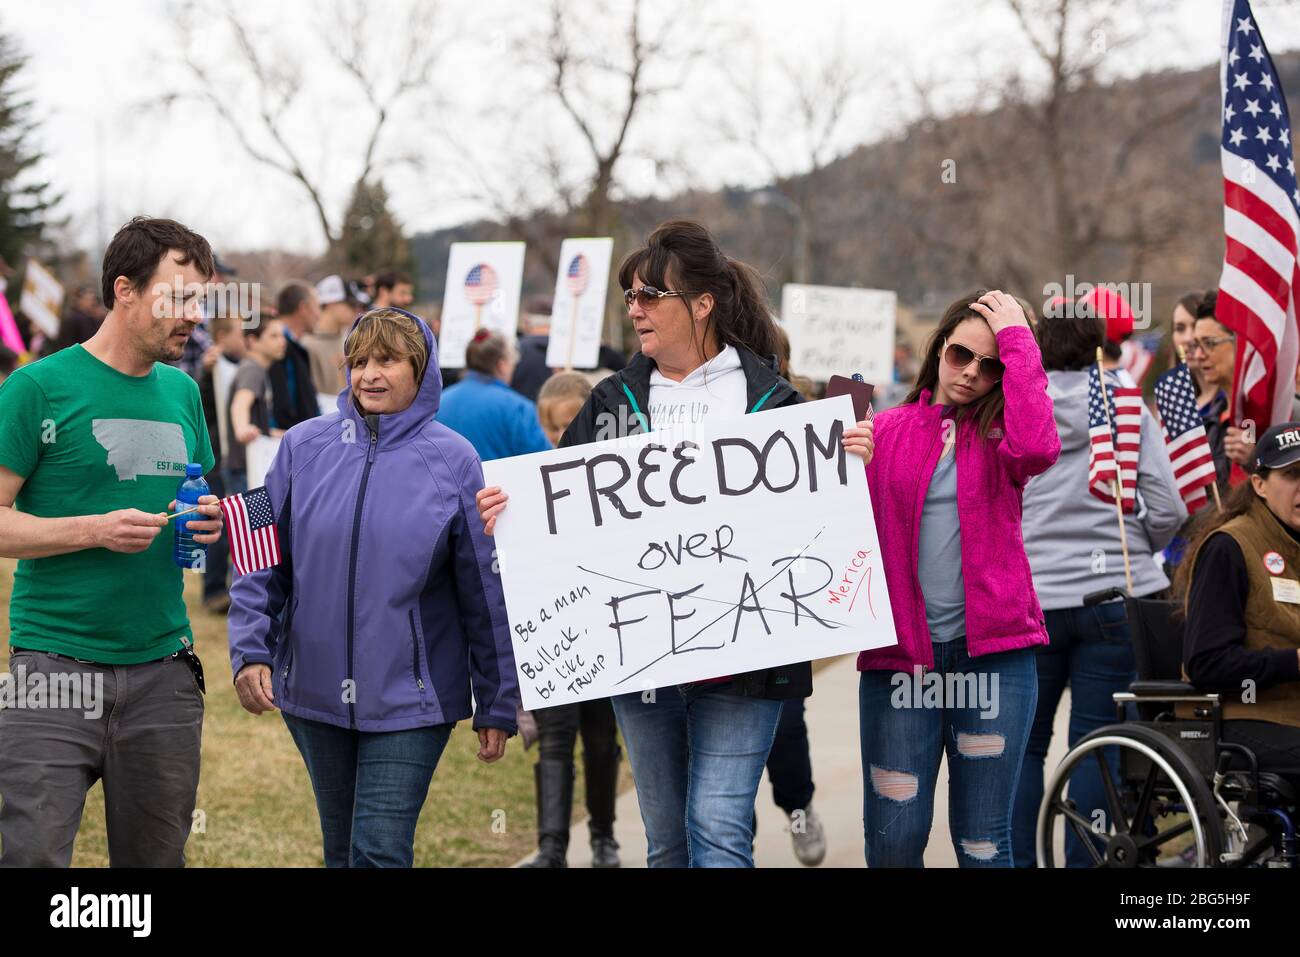 Helena, Montana - April 19, 2020: A woman protesting and holding a freedom over fear sign at a Rally during the Coronavirus government shutdown. A cro Stock Photo